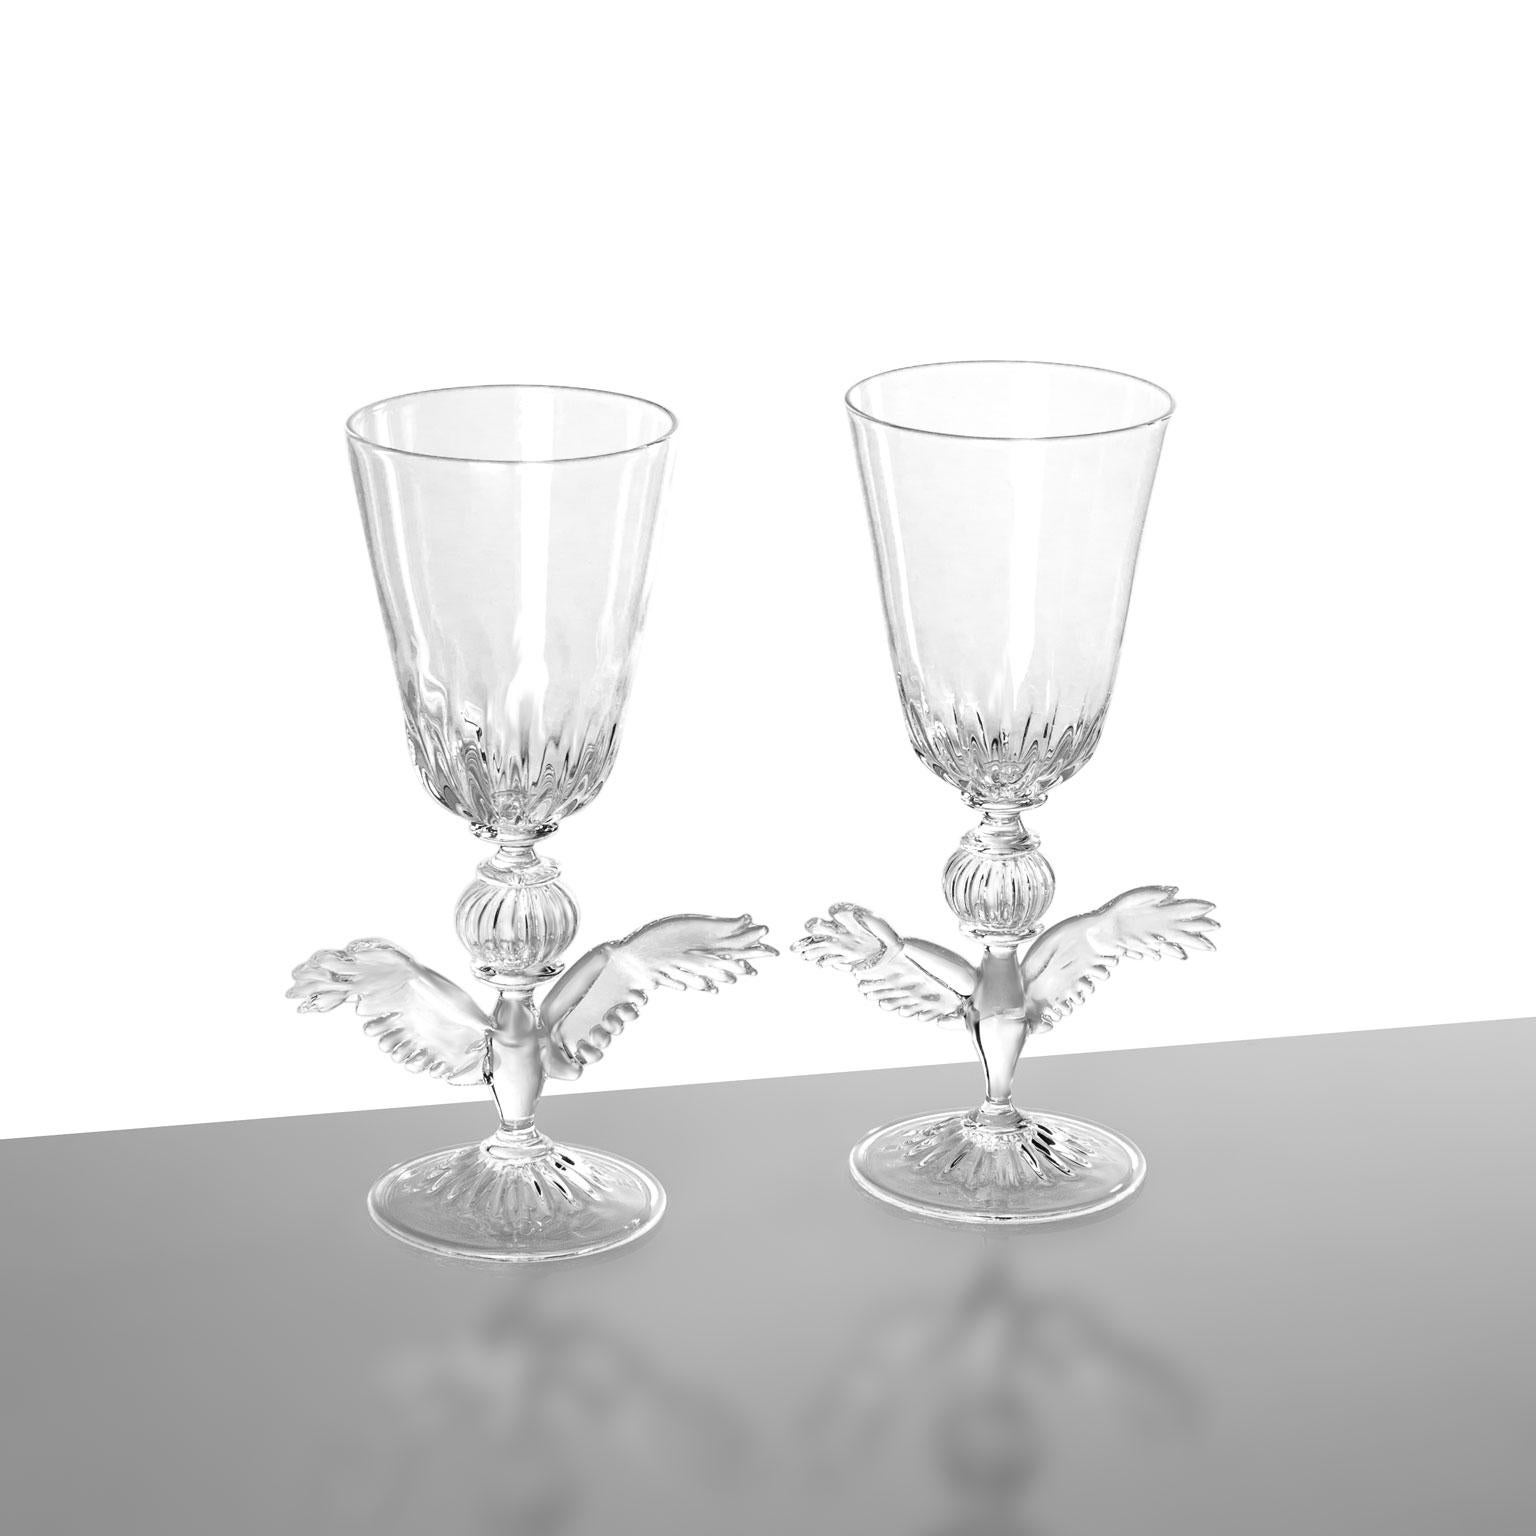 Hand-Crafted Contemporary Trionfo Hand-Blown Glass Sculptured A pair of  Decorative Goblets  For Sale